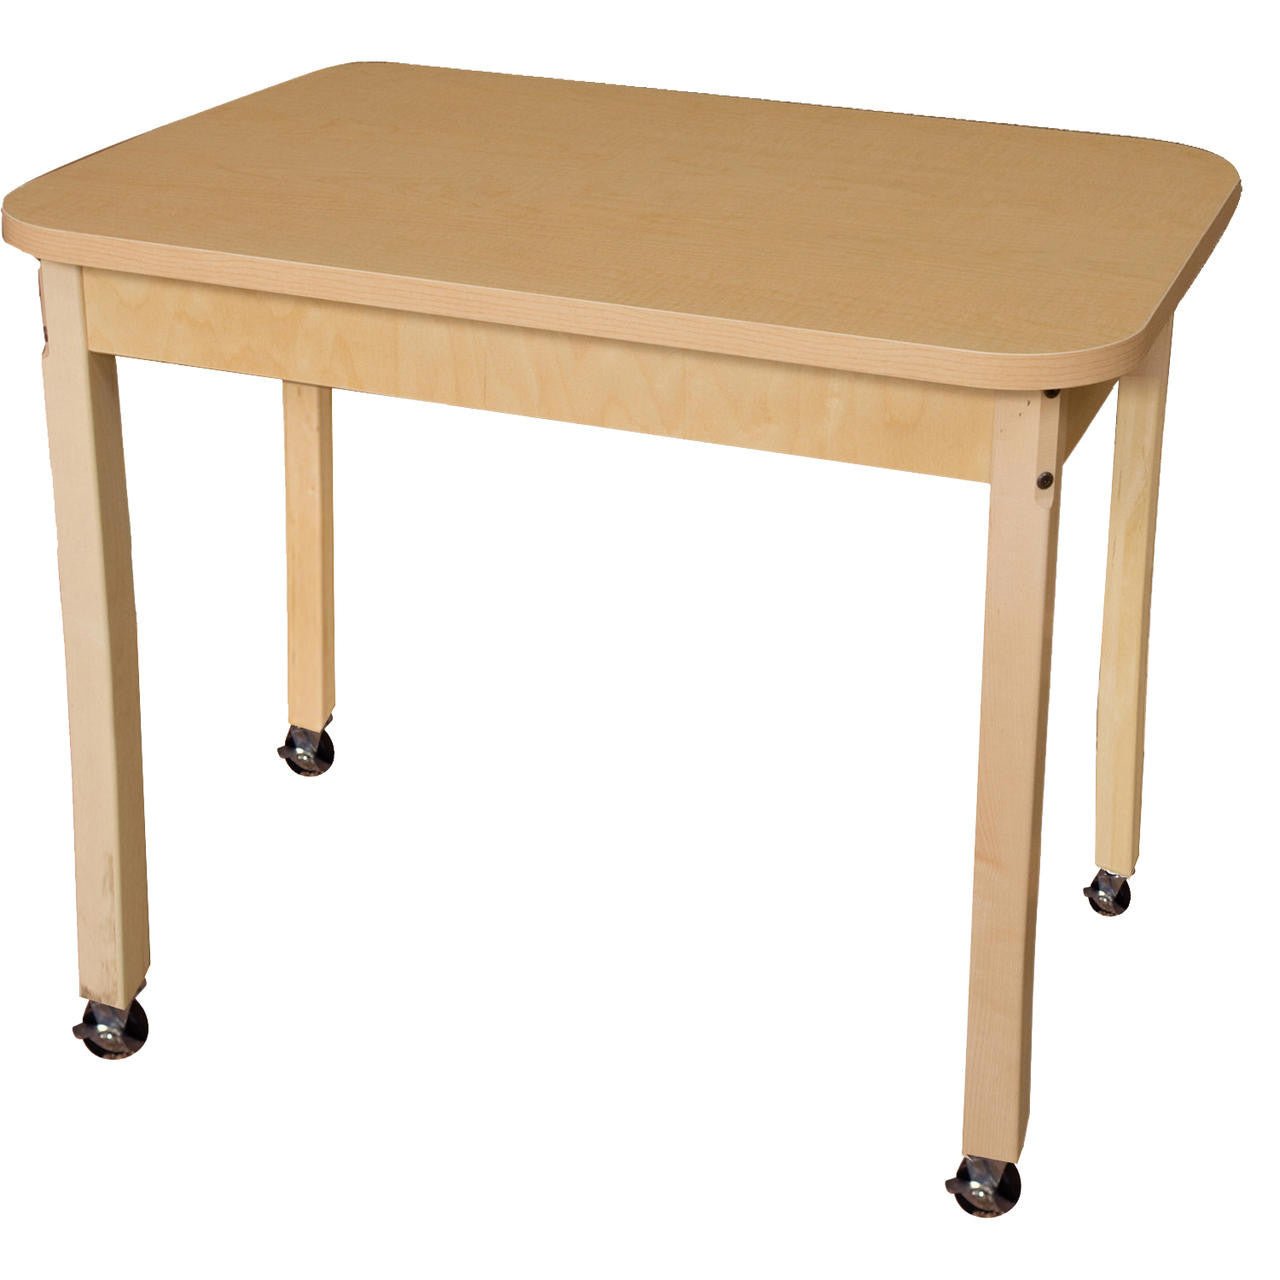 Rectangle High Pressure Laminate Table with Hardwood Legs- 29